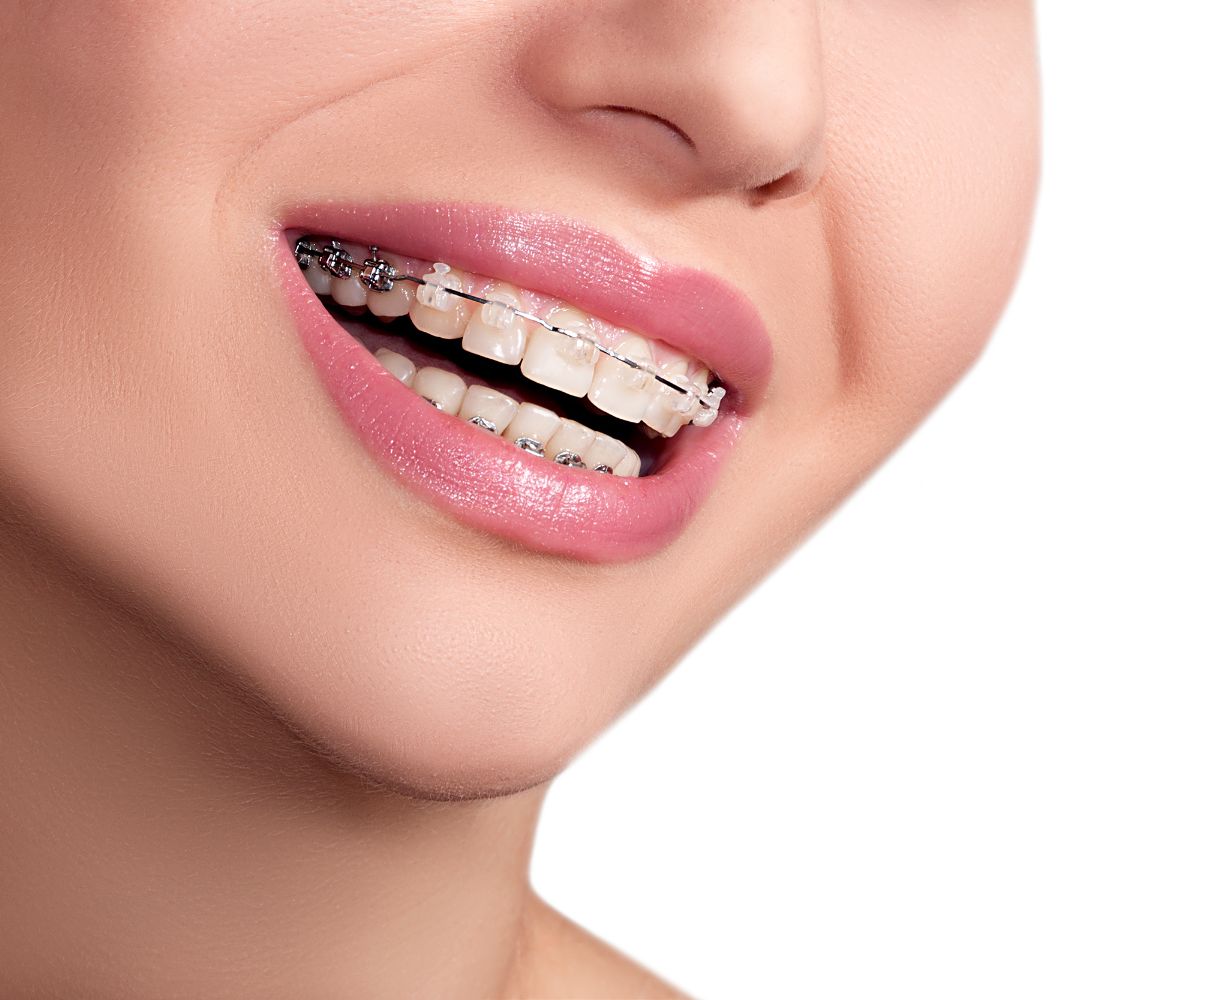 detail of a woman's mouth wearing braces